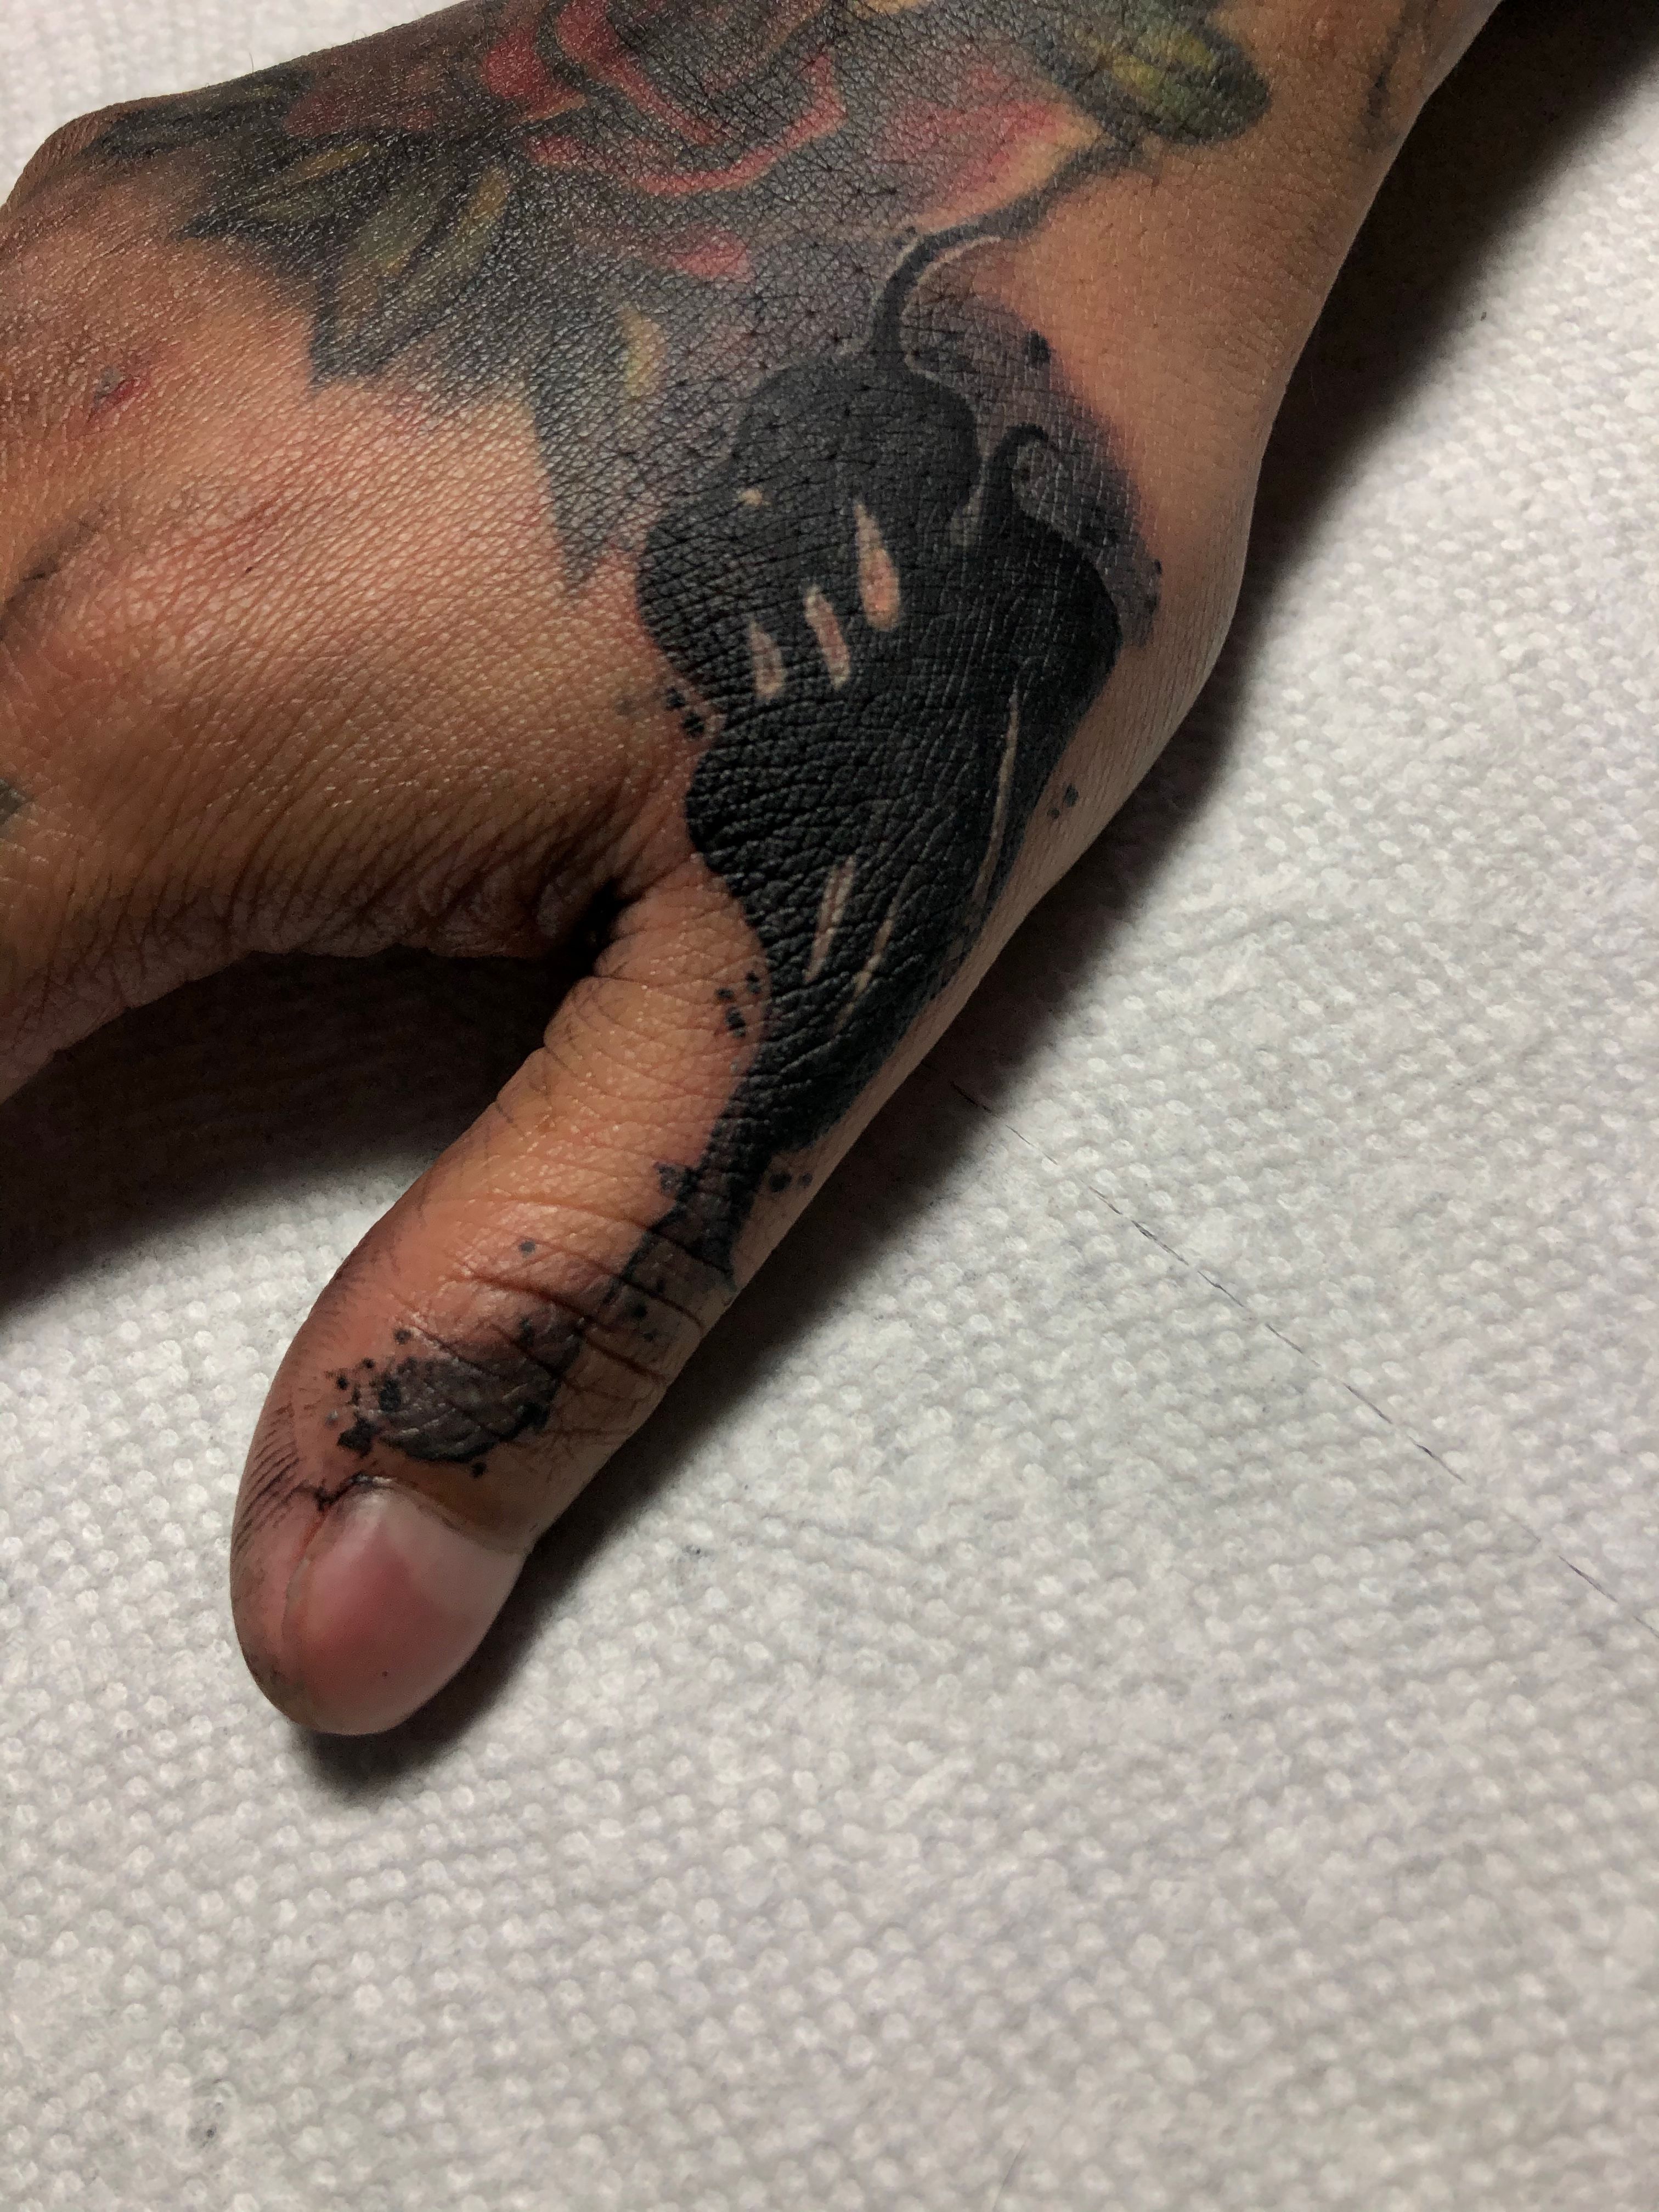 Minimalistic style fist tattoo located on the finger